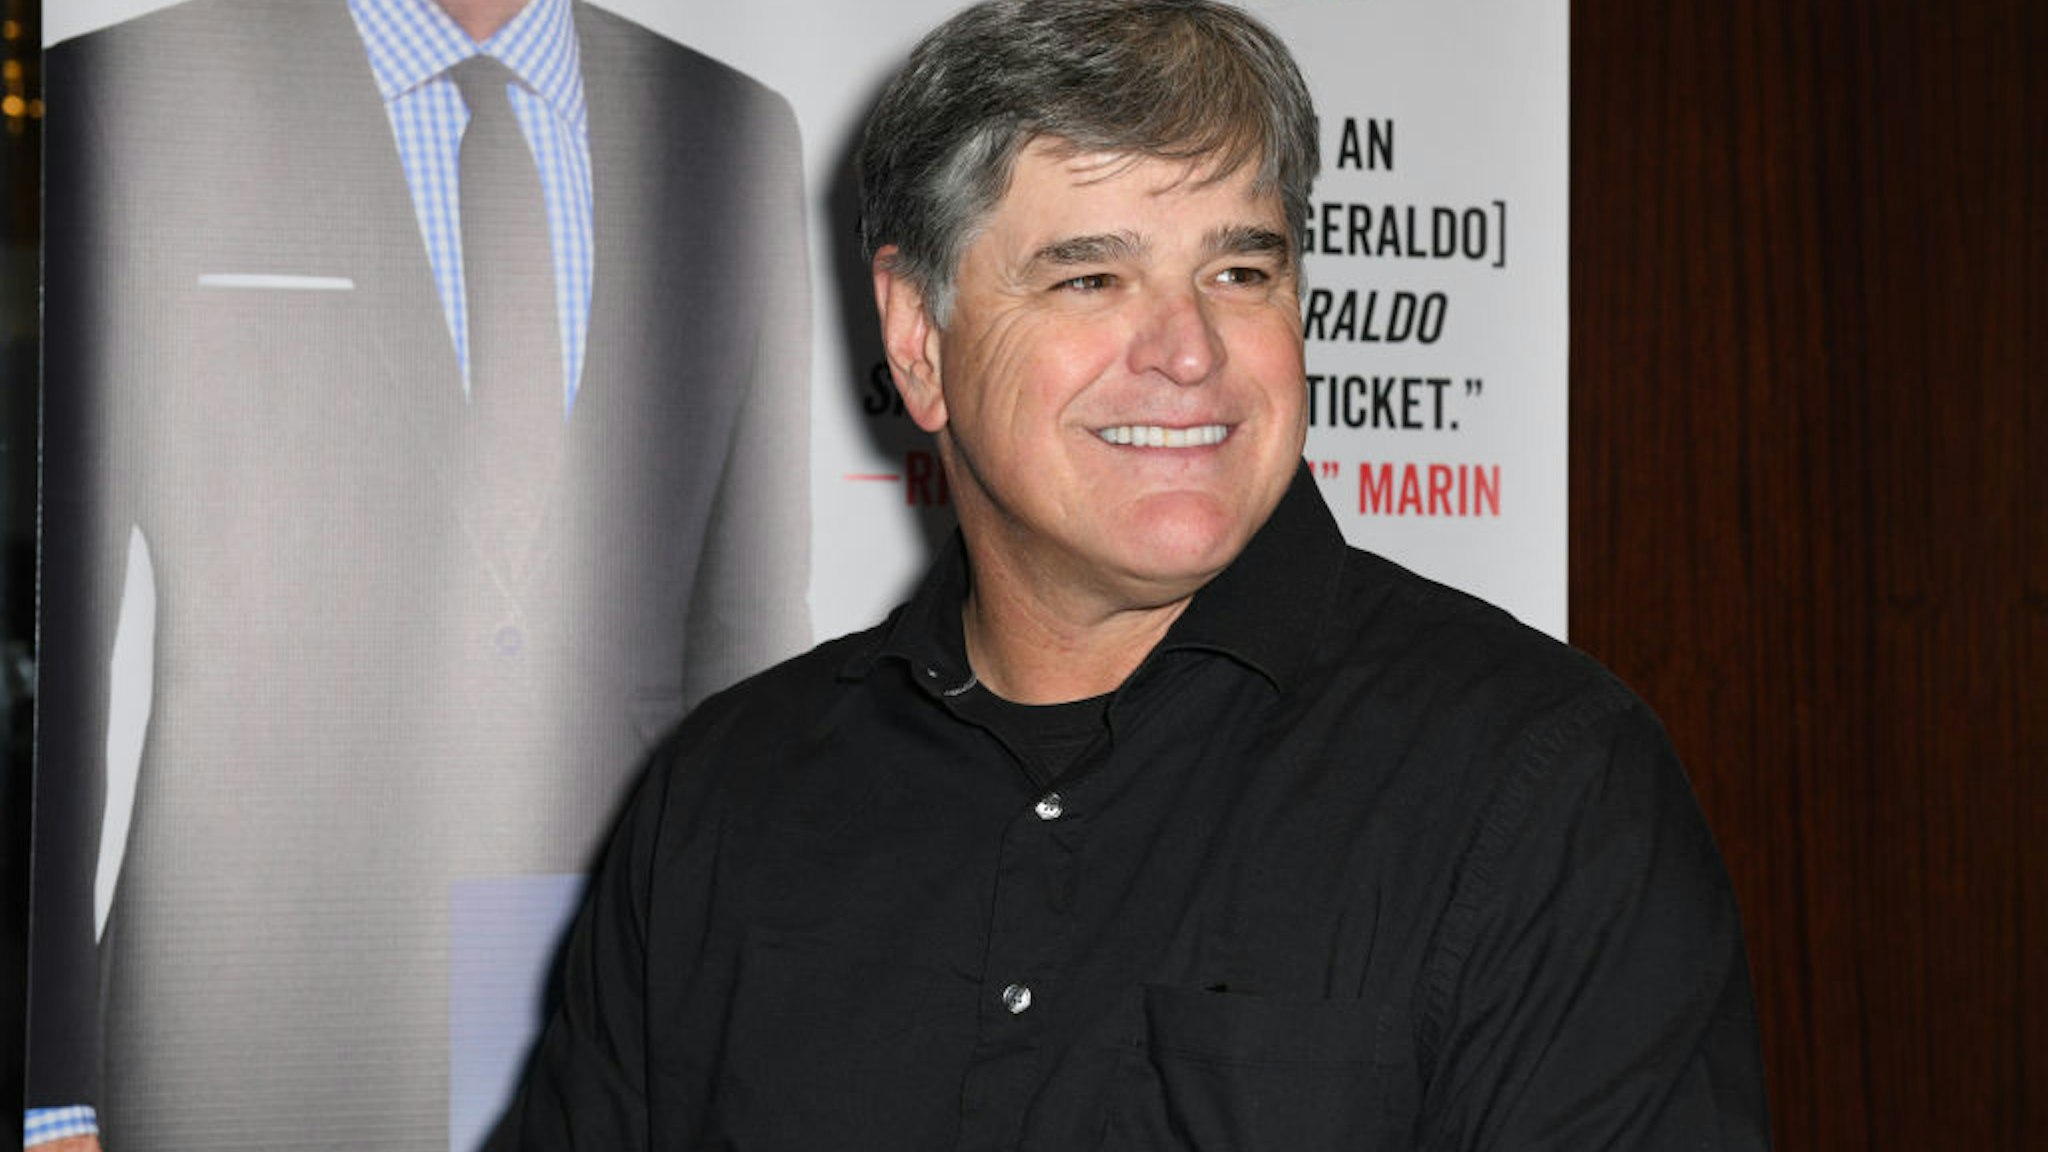 NEW YORK, NY - APRIL 02: Sean Hannity attends Sean Hannity &amp; Friends celebrate the publication of "The Geraldo Show: A Memoir" by Geraldo Rivera at Del Frisco's on April 2, 2018 in New York City. (Photo by Jared Siskin/Patrick McMullan via Getty Images)